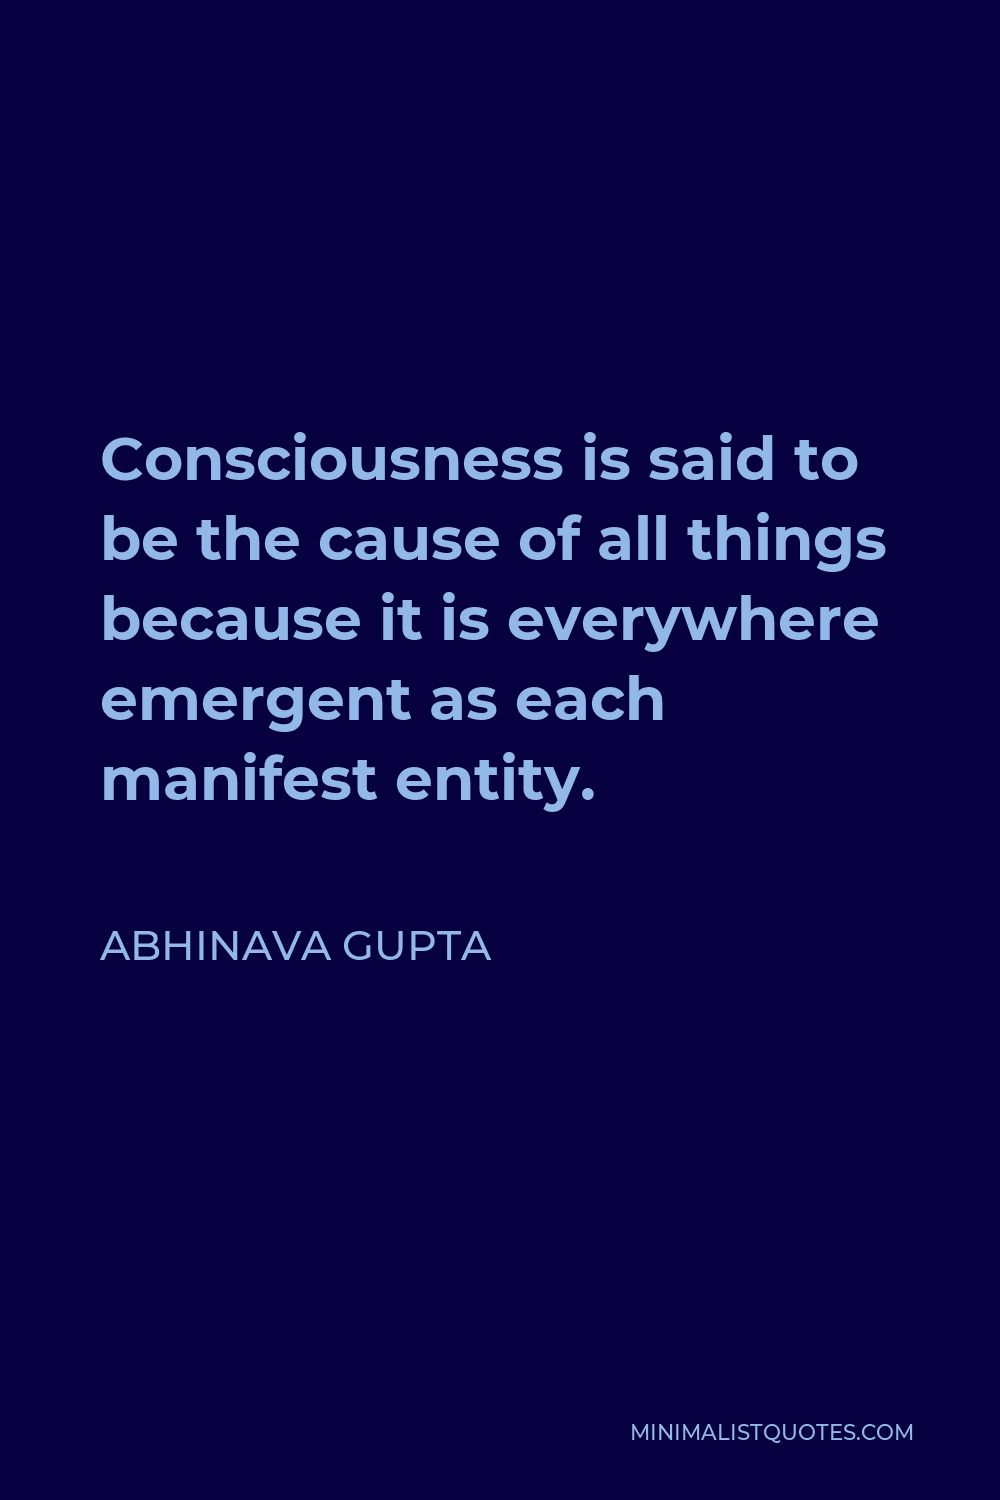 Abhinava Gupta Quote - Consciousness is said to be the cause of all things because it is everywhere emergent as each manifest entity.